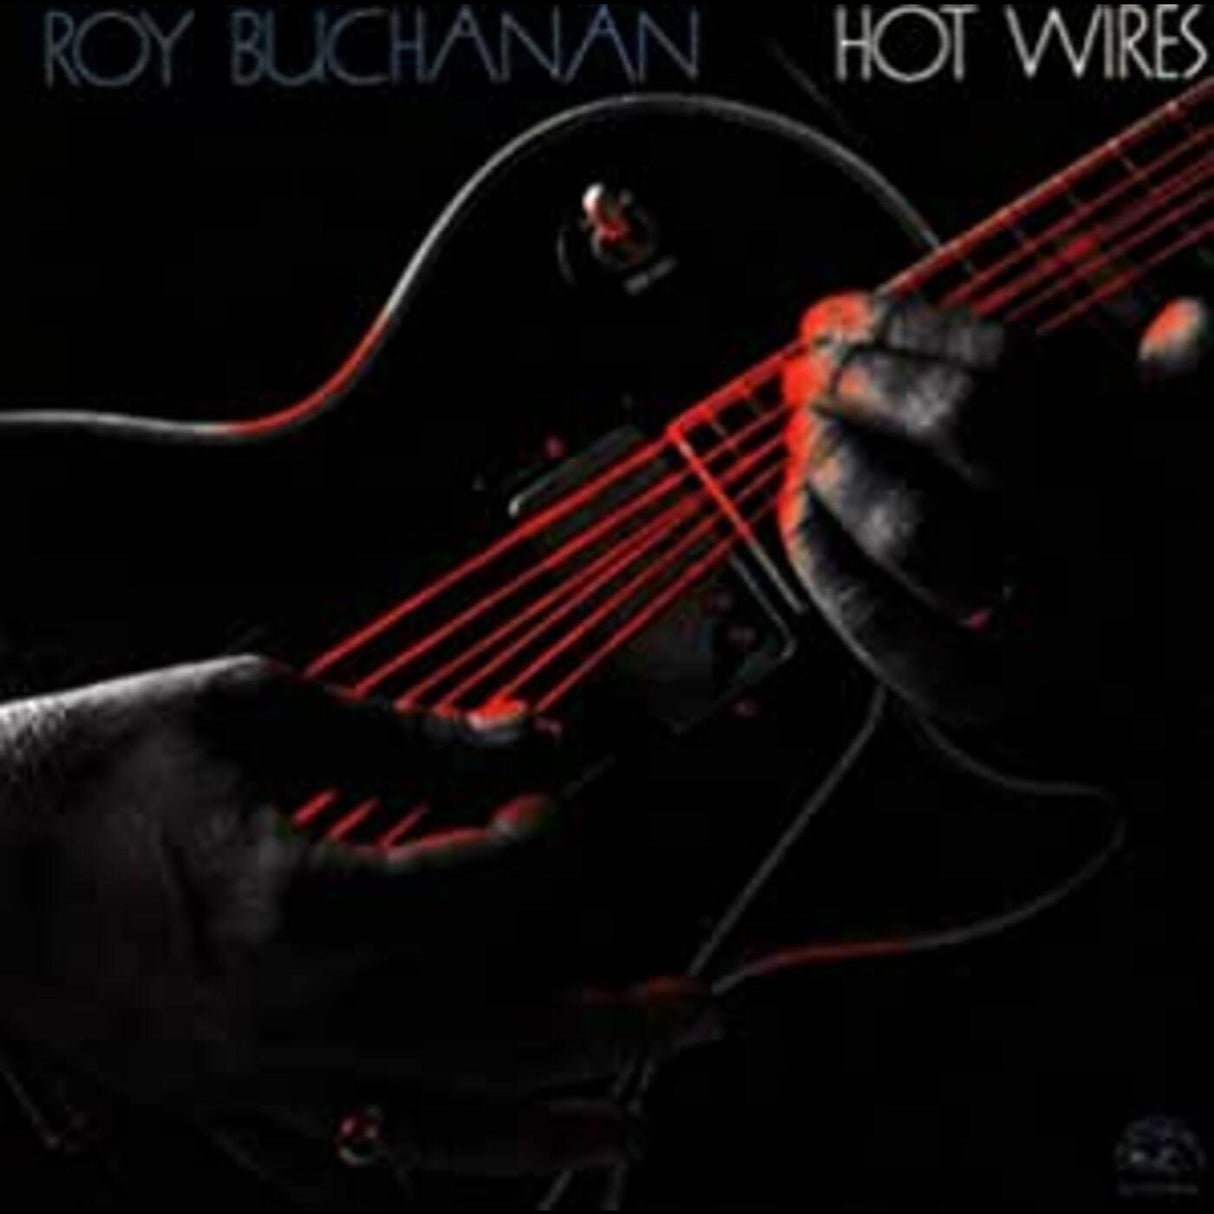 Hot Wires [CD]